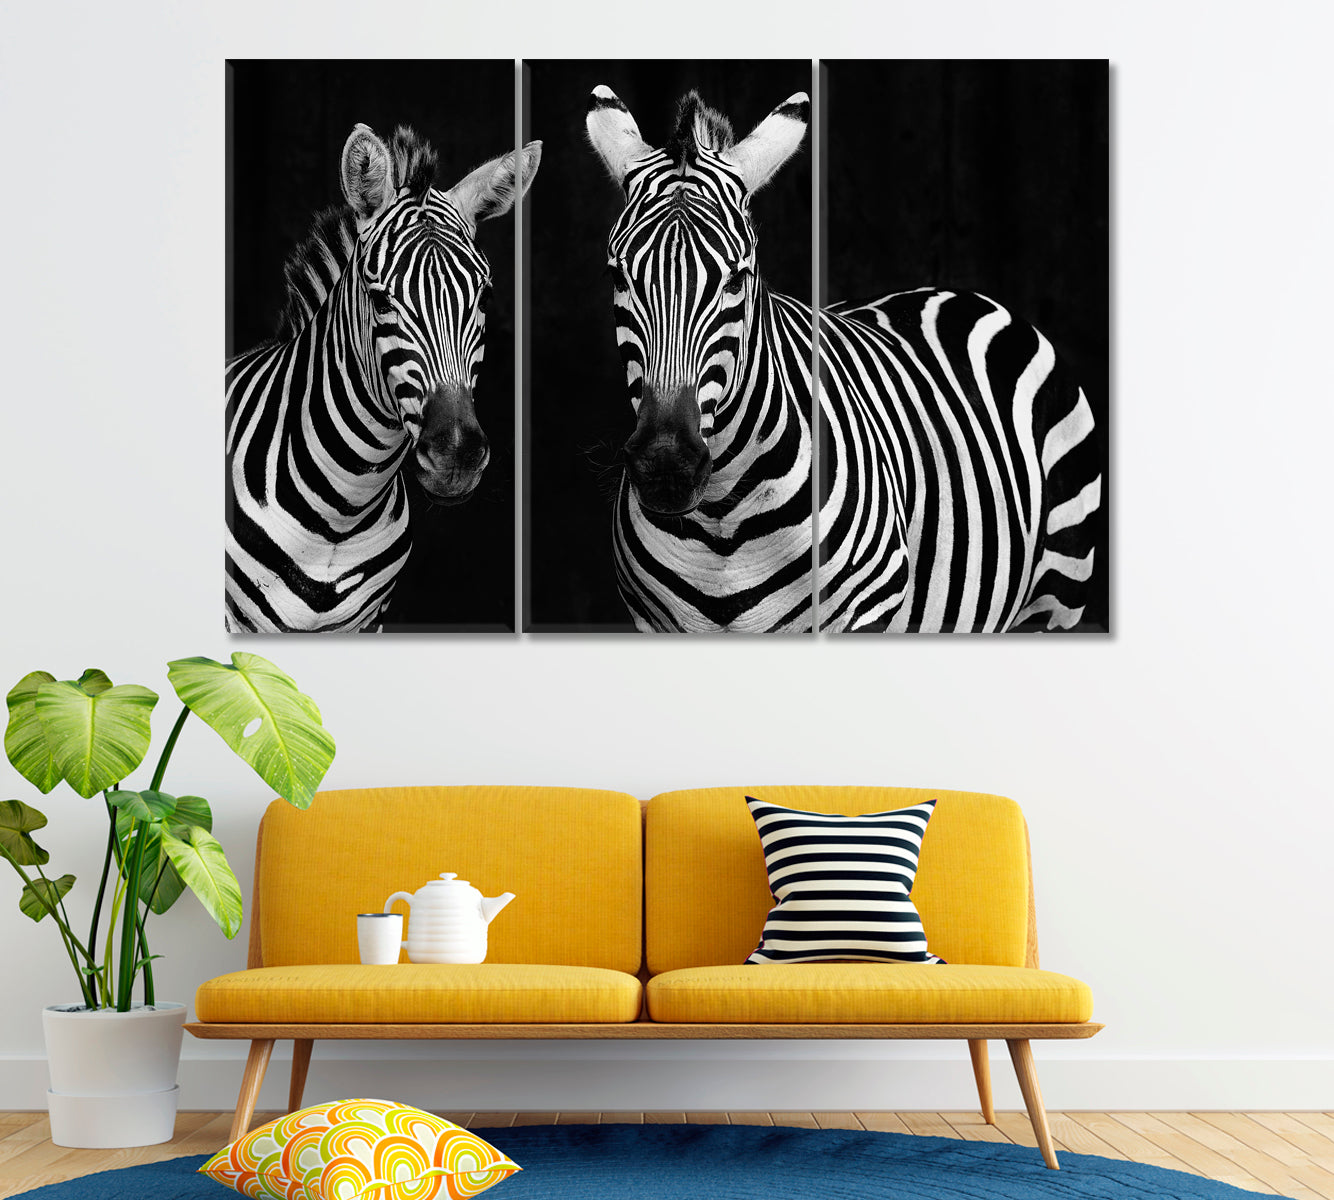 Zebras in Black and White Canvas Print ArtLexy 3 Panels 36"x24" inches 